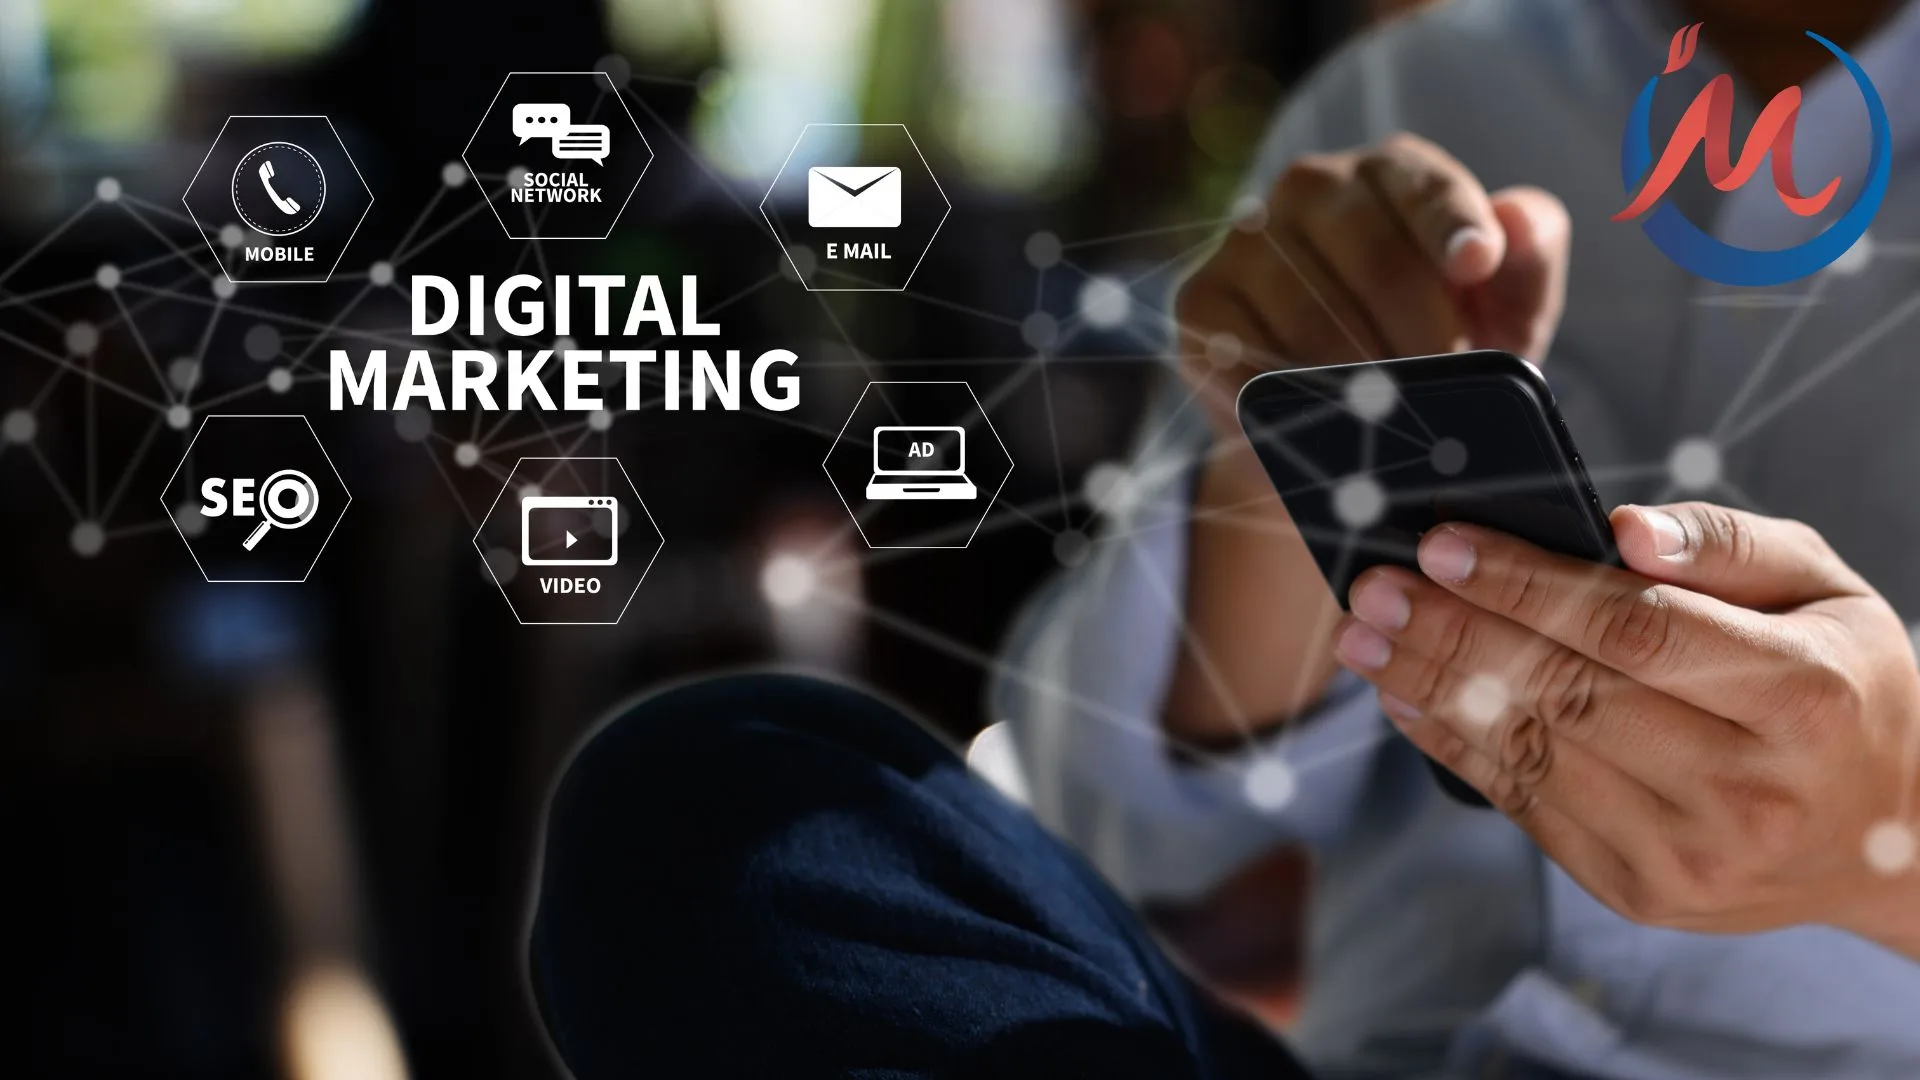 Maximize Your Online Impact With Affordable Digital Marketing Services In Edmonton